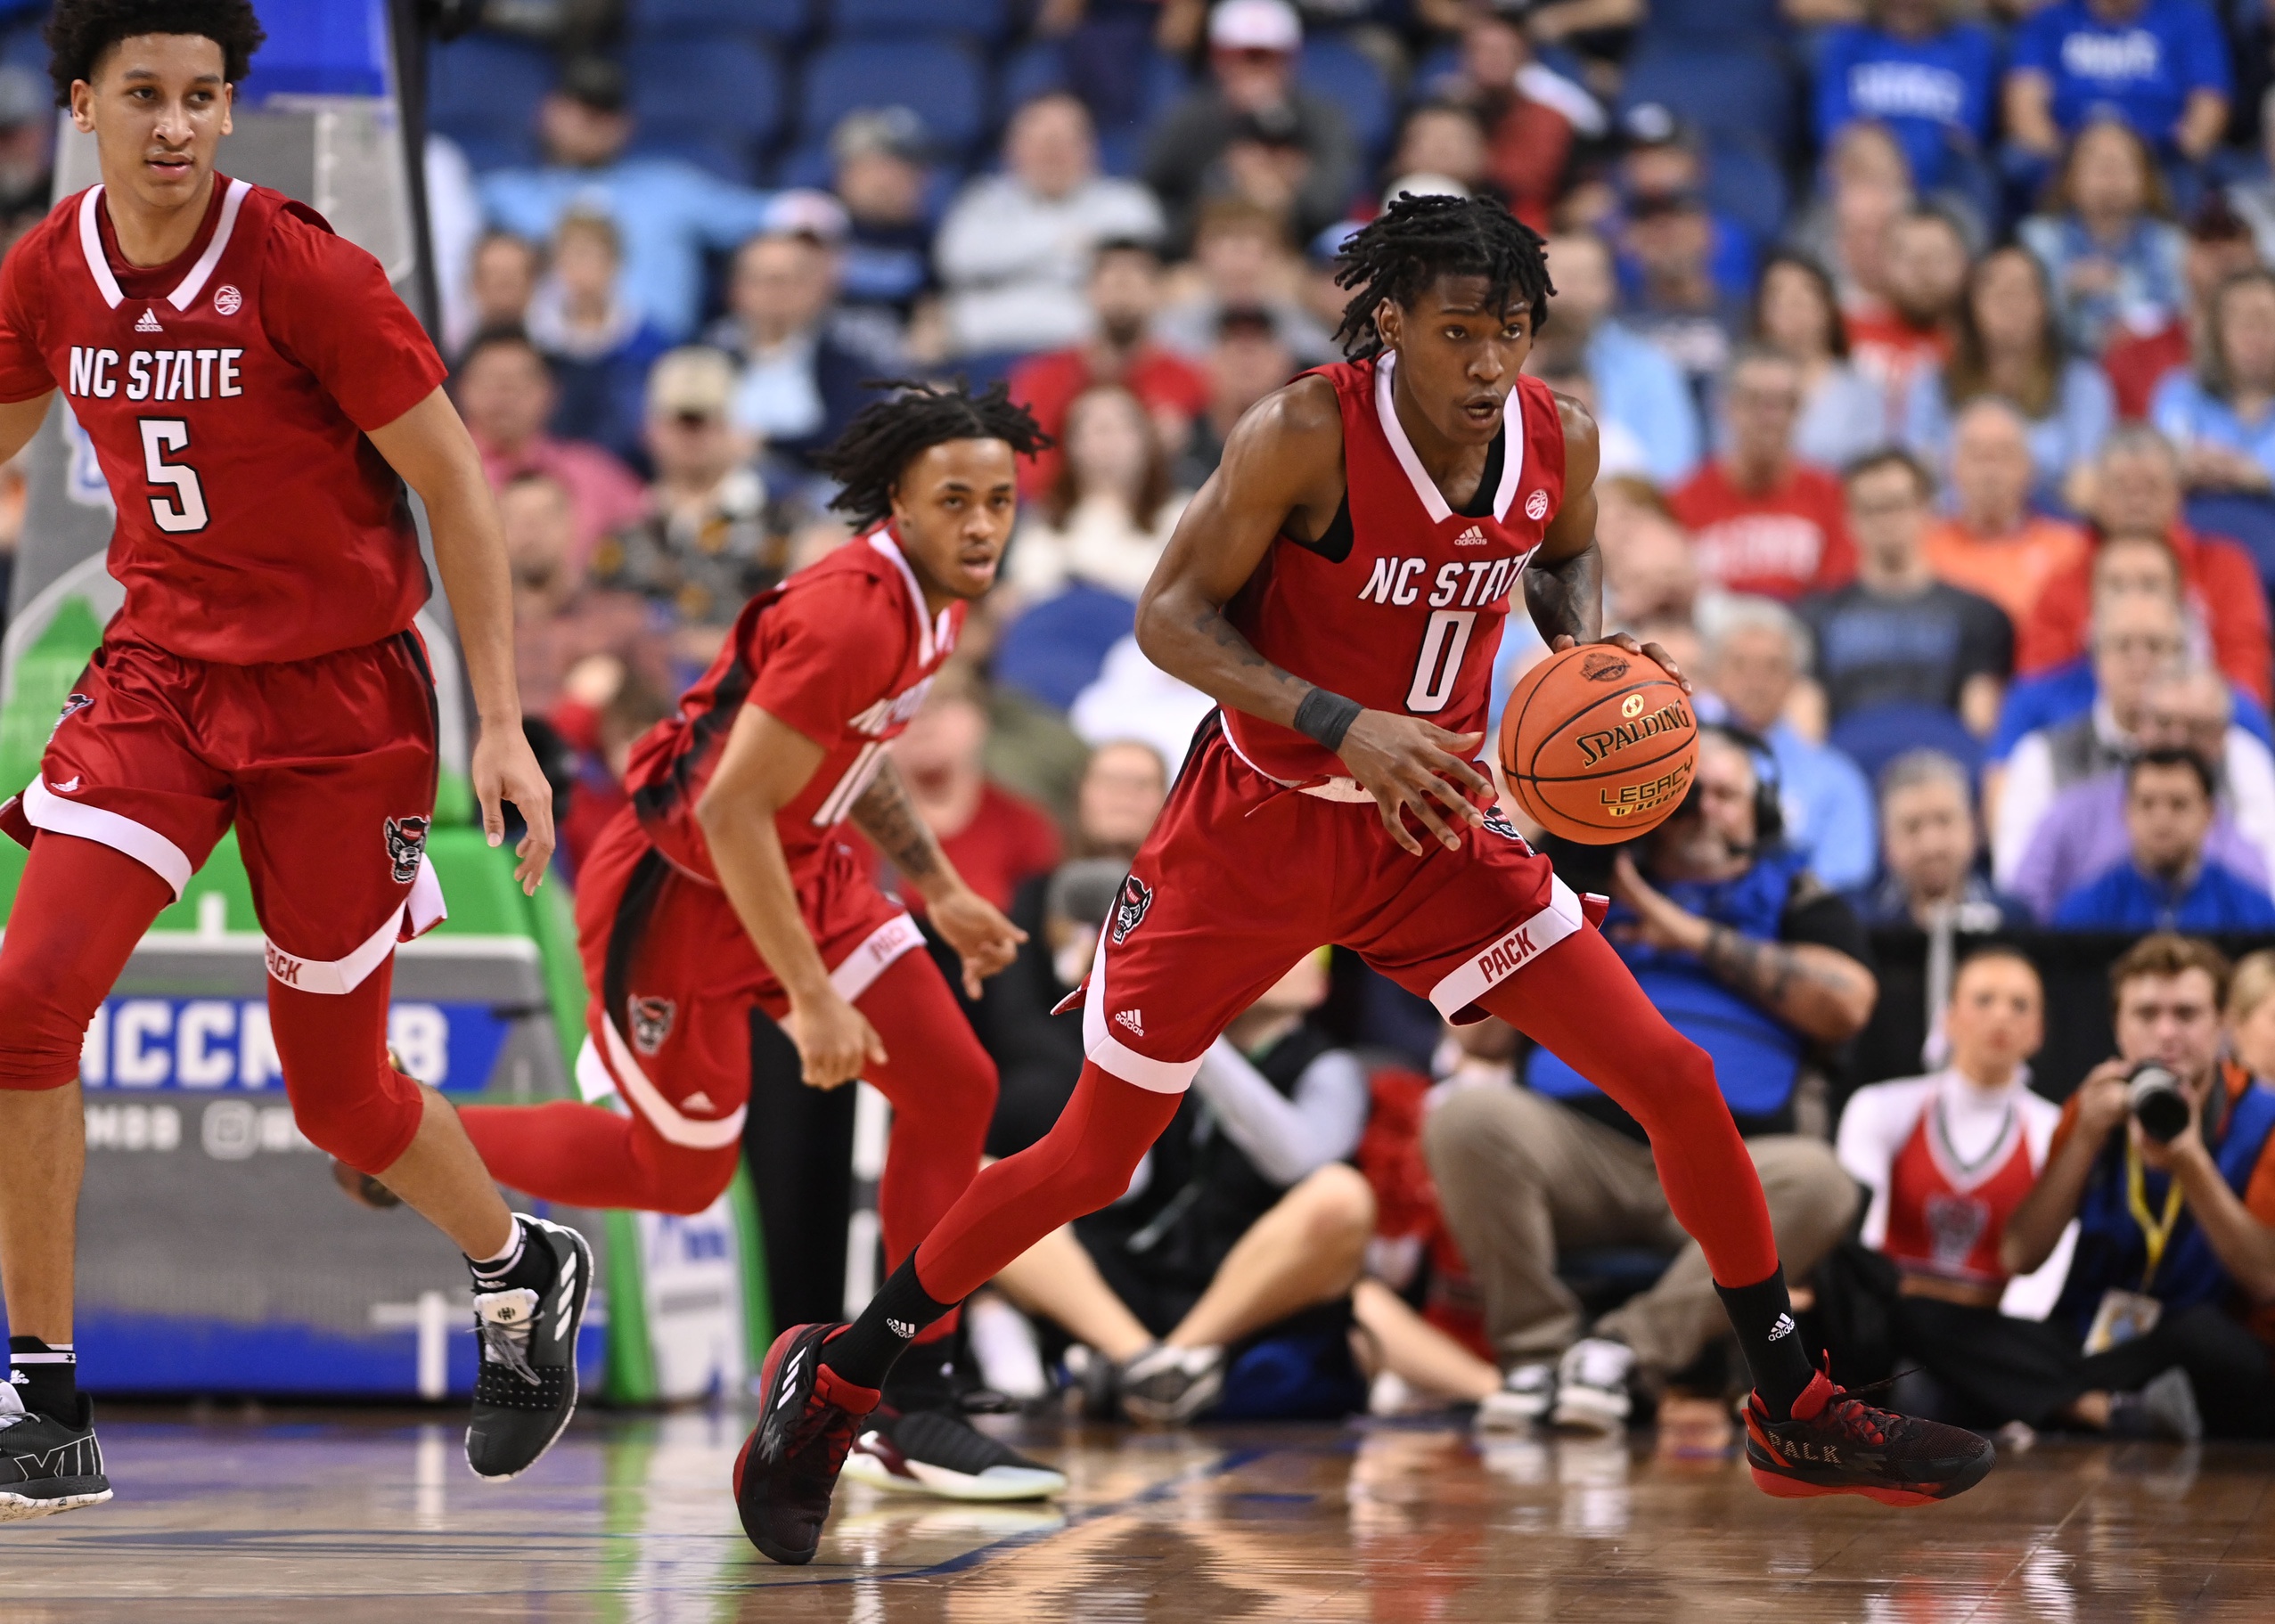 Terquavion Smith leads NC State to a possible cinderella run in the March Madness bracket.